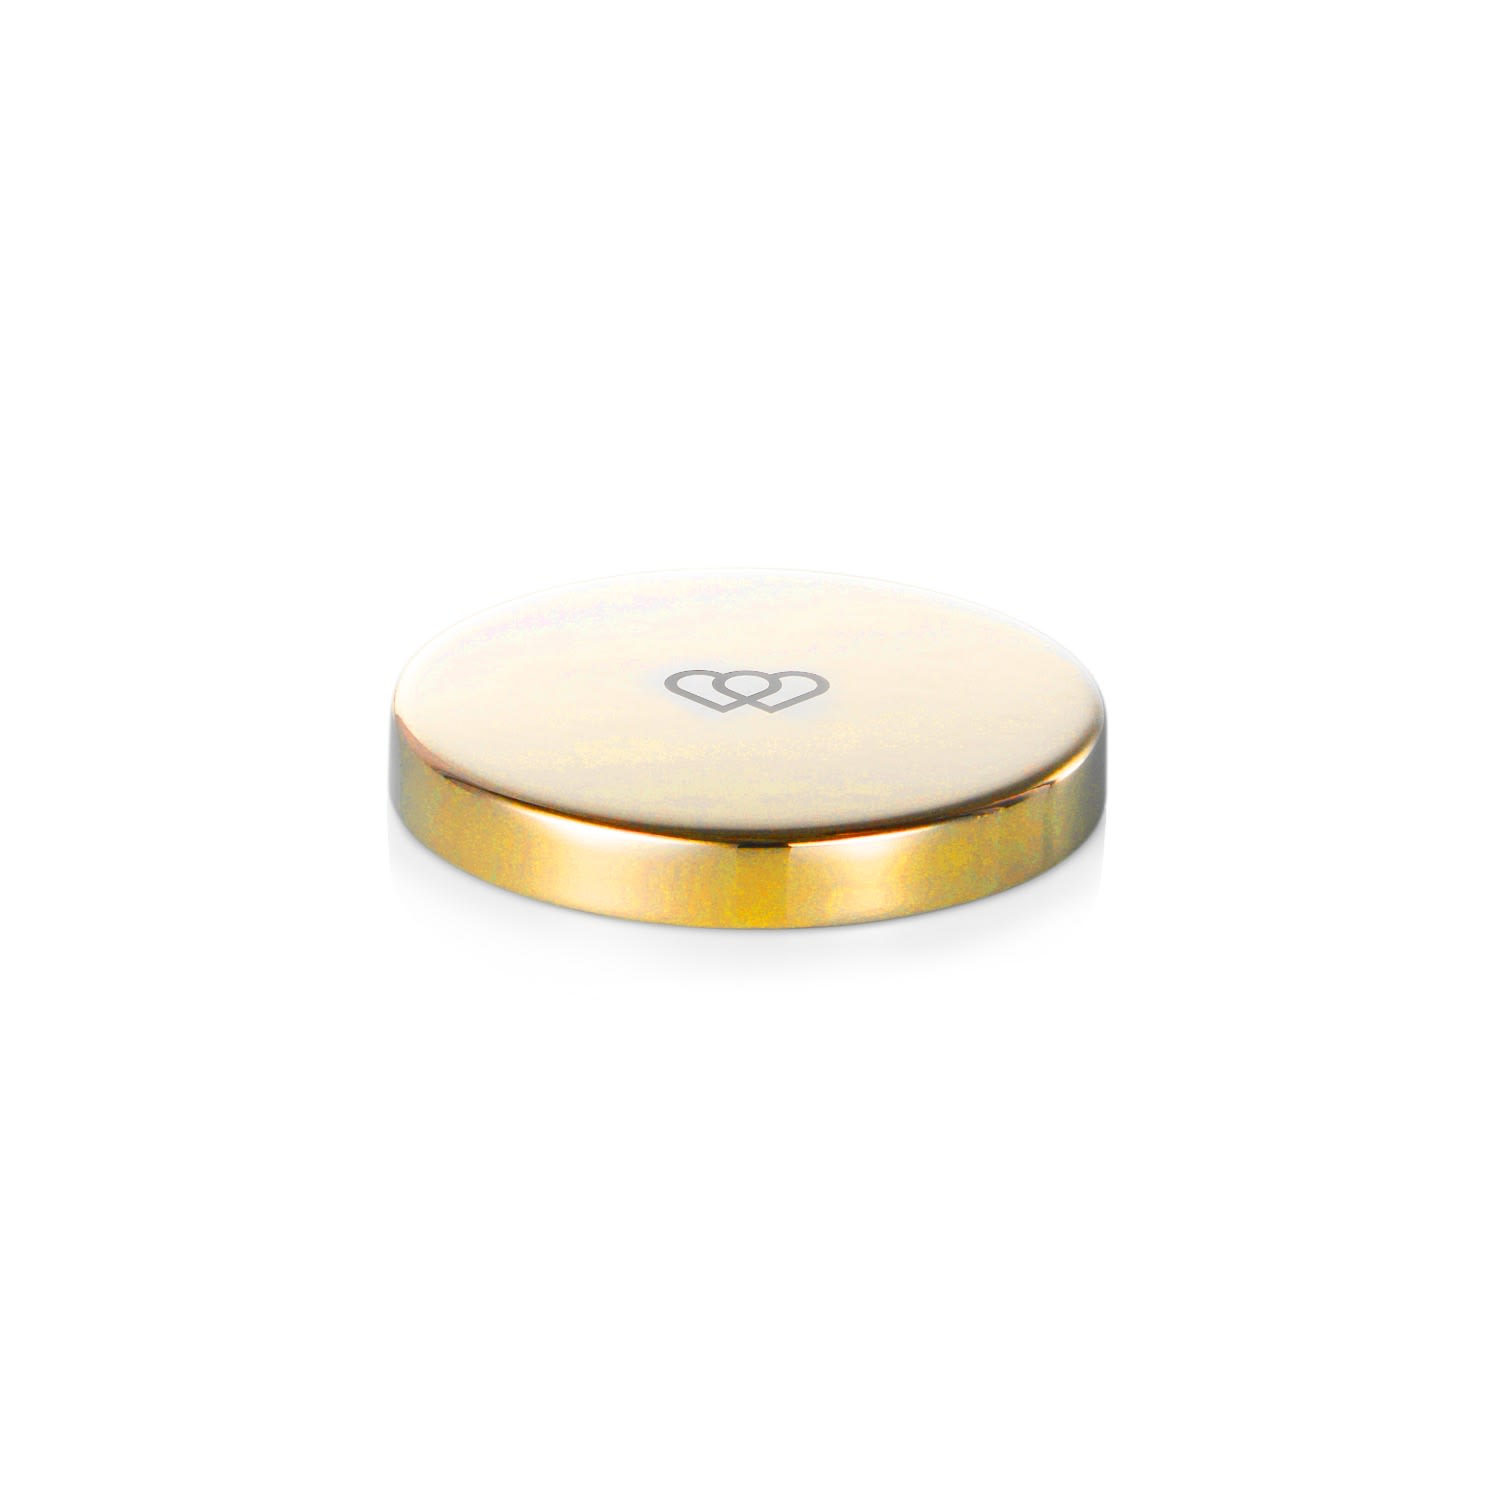 Luxury Engraved Gold Tone Mini Candle Lid One Size The Universal Soul Company